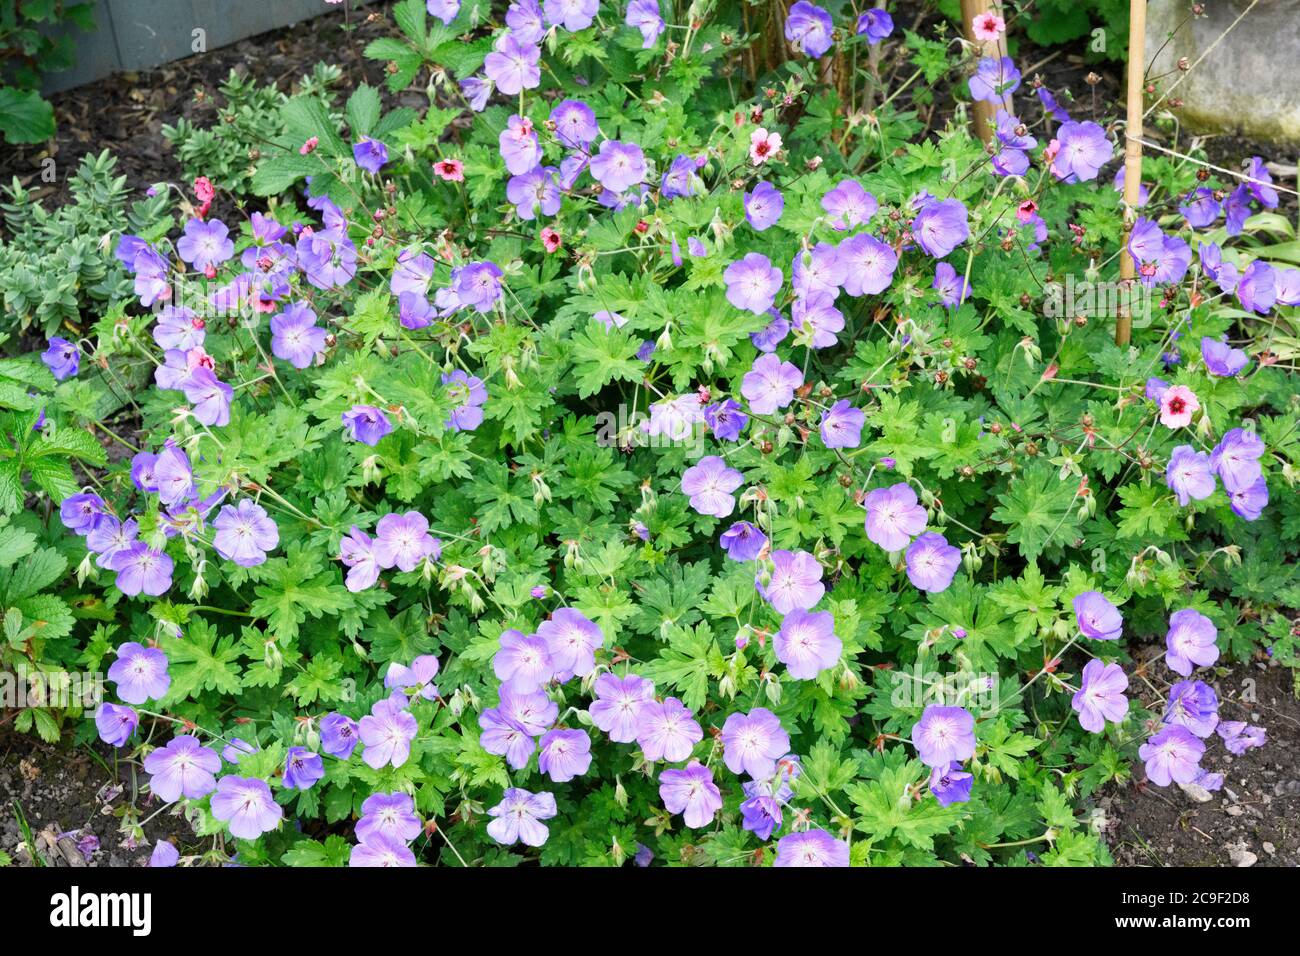 A variety of blue Cranesbill which in itself, is a type of Geranium plant Stock Photo